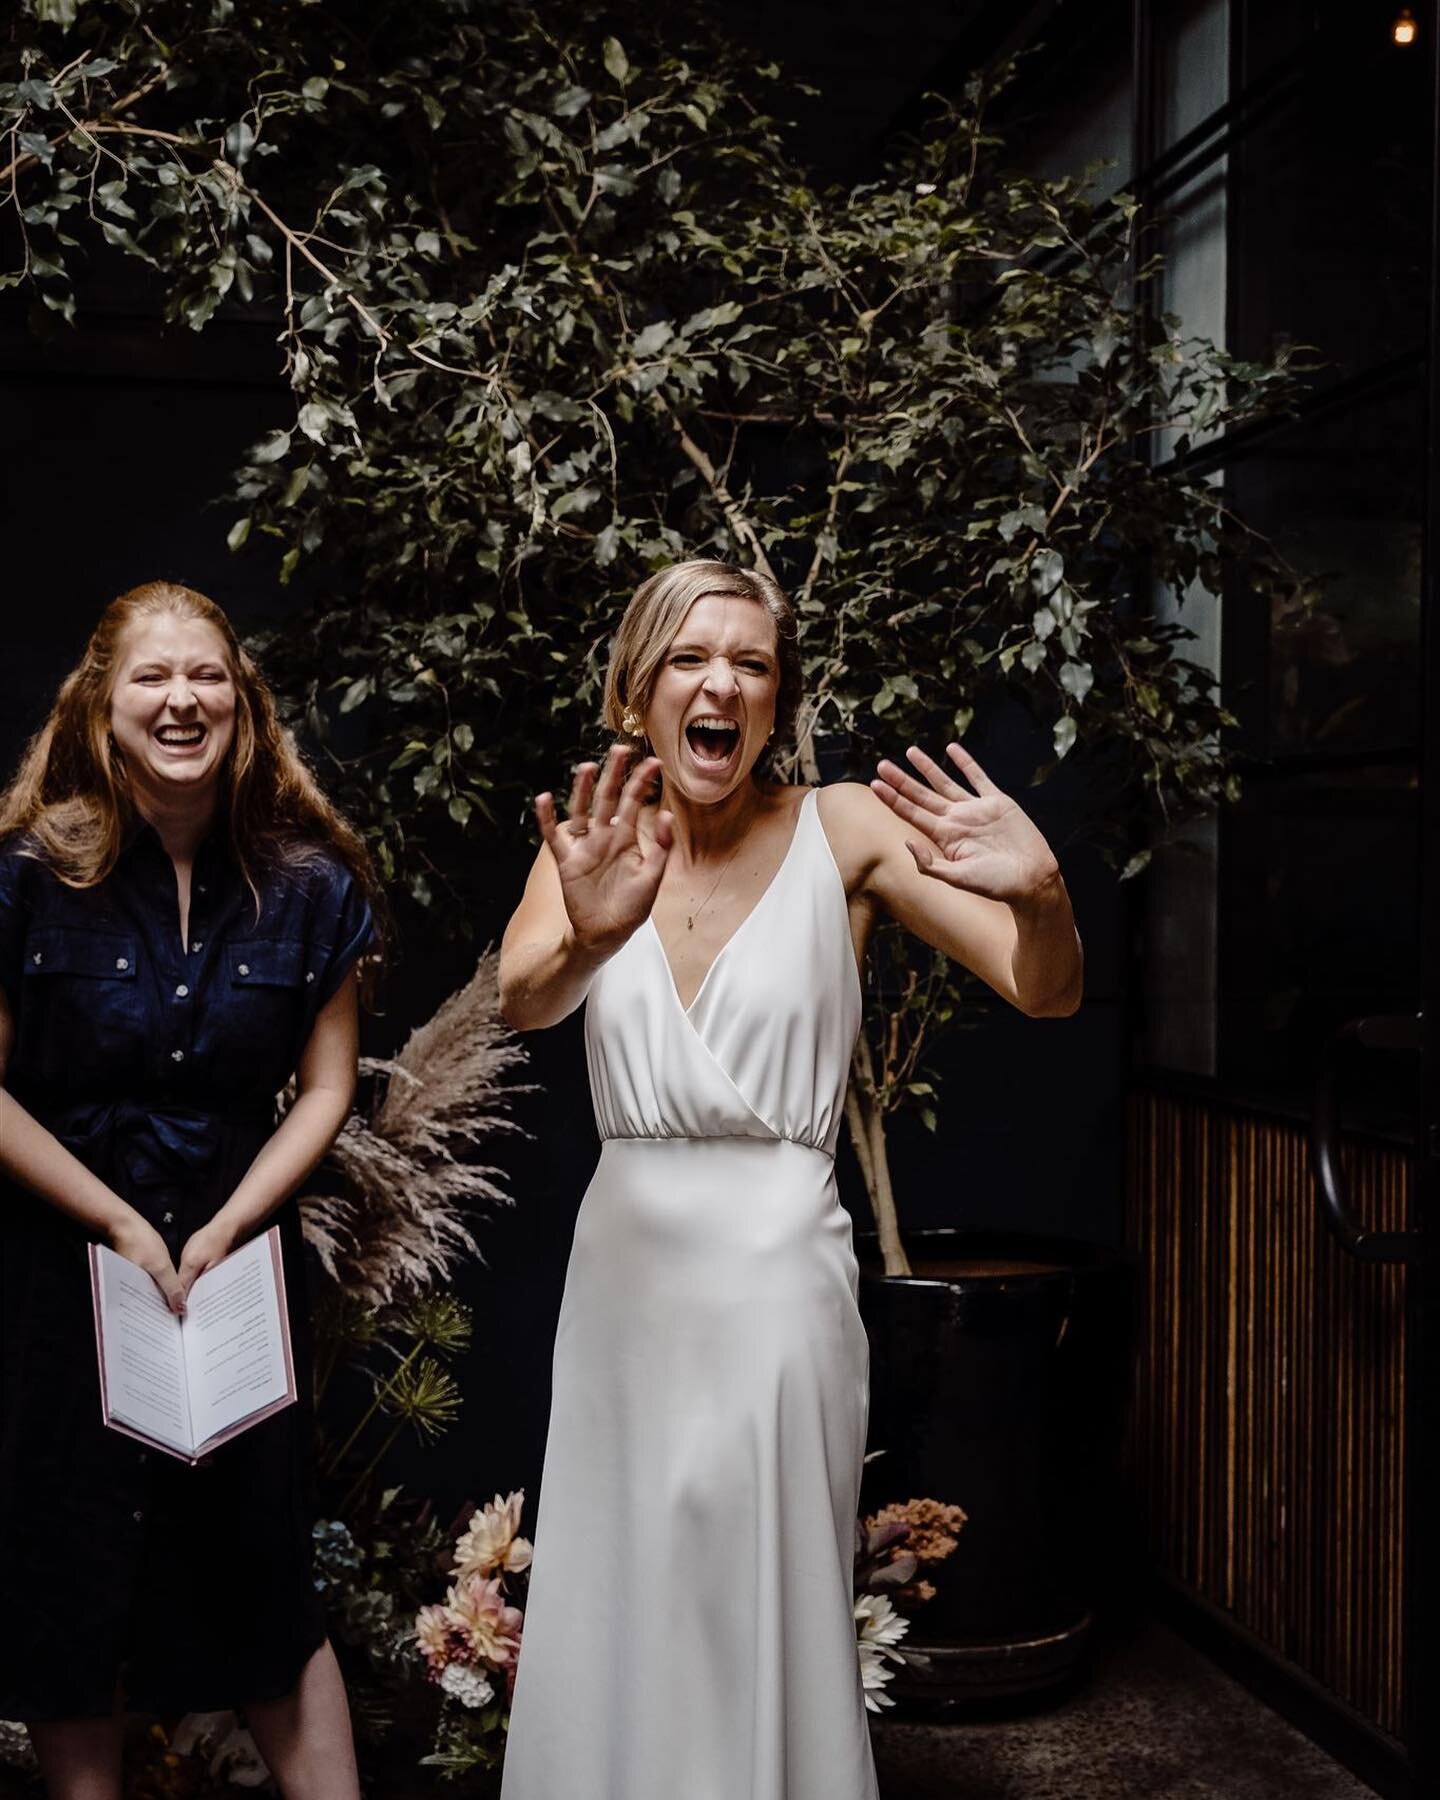 Saying hey to the fam back in NZ! 💓💓

Photos: Em, (in a slinky white wedding dress), myself (in navy) and Tom (looking like a groom) waving to the computer live streaming the ceremony! The last photo has bonus confetti! They all have that @maeganbr